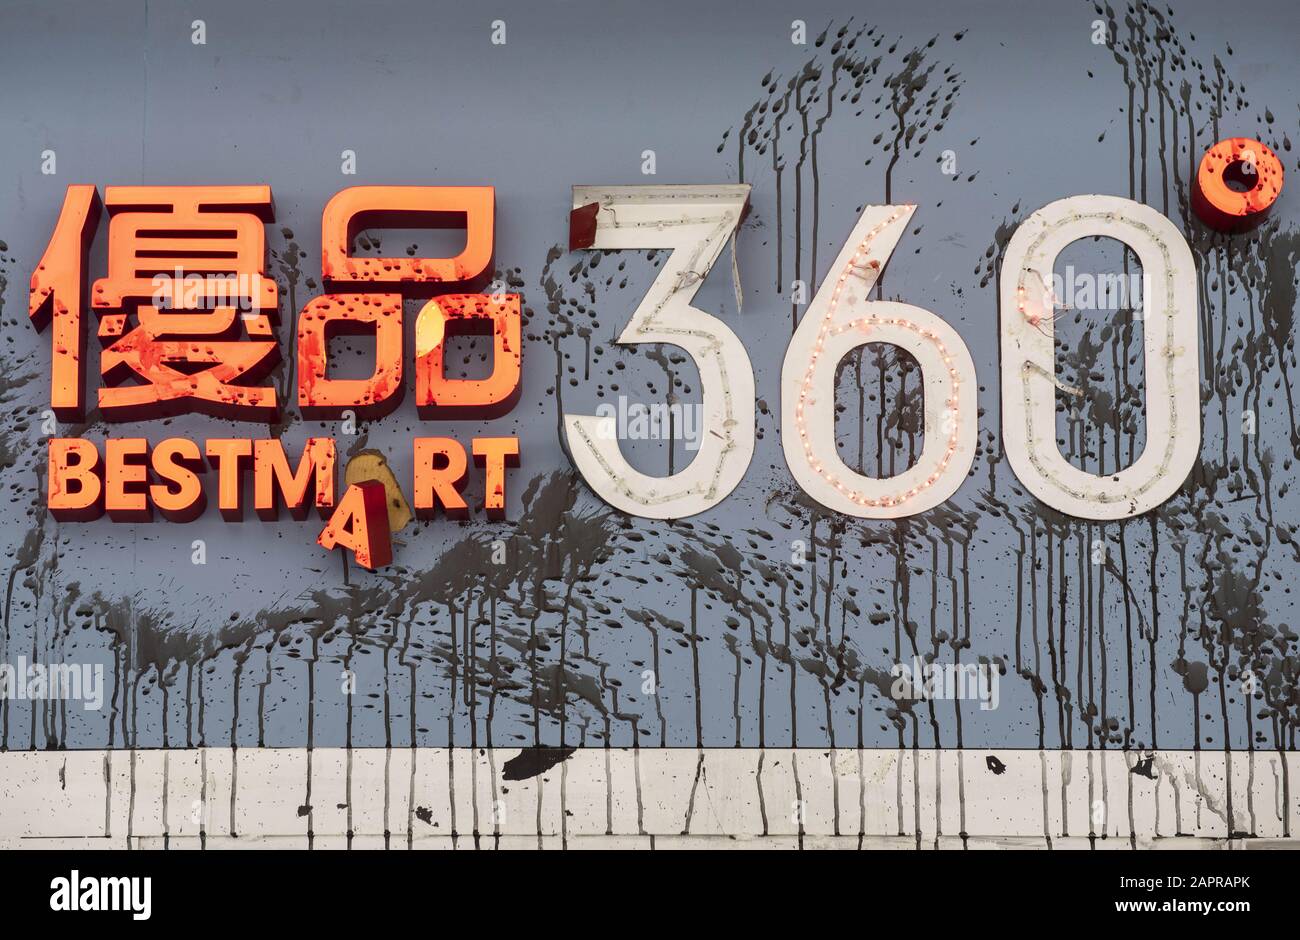 China. 23rd Jan, 2020. Vandalized snack chain store Best Mart 360 logo seen in Hong Kong. Credit: Budrul Chukrut/SOPA Images/ZUMA Wire/Alamy Live News Stock Photo